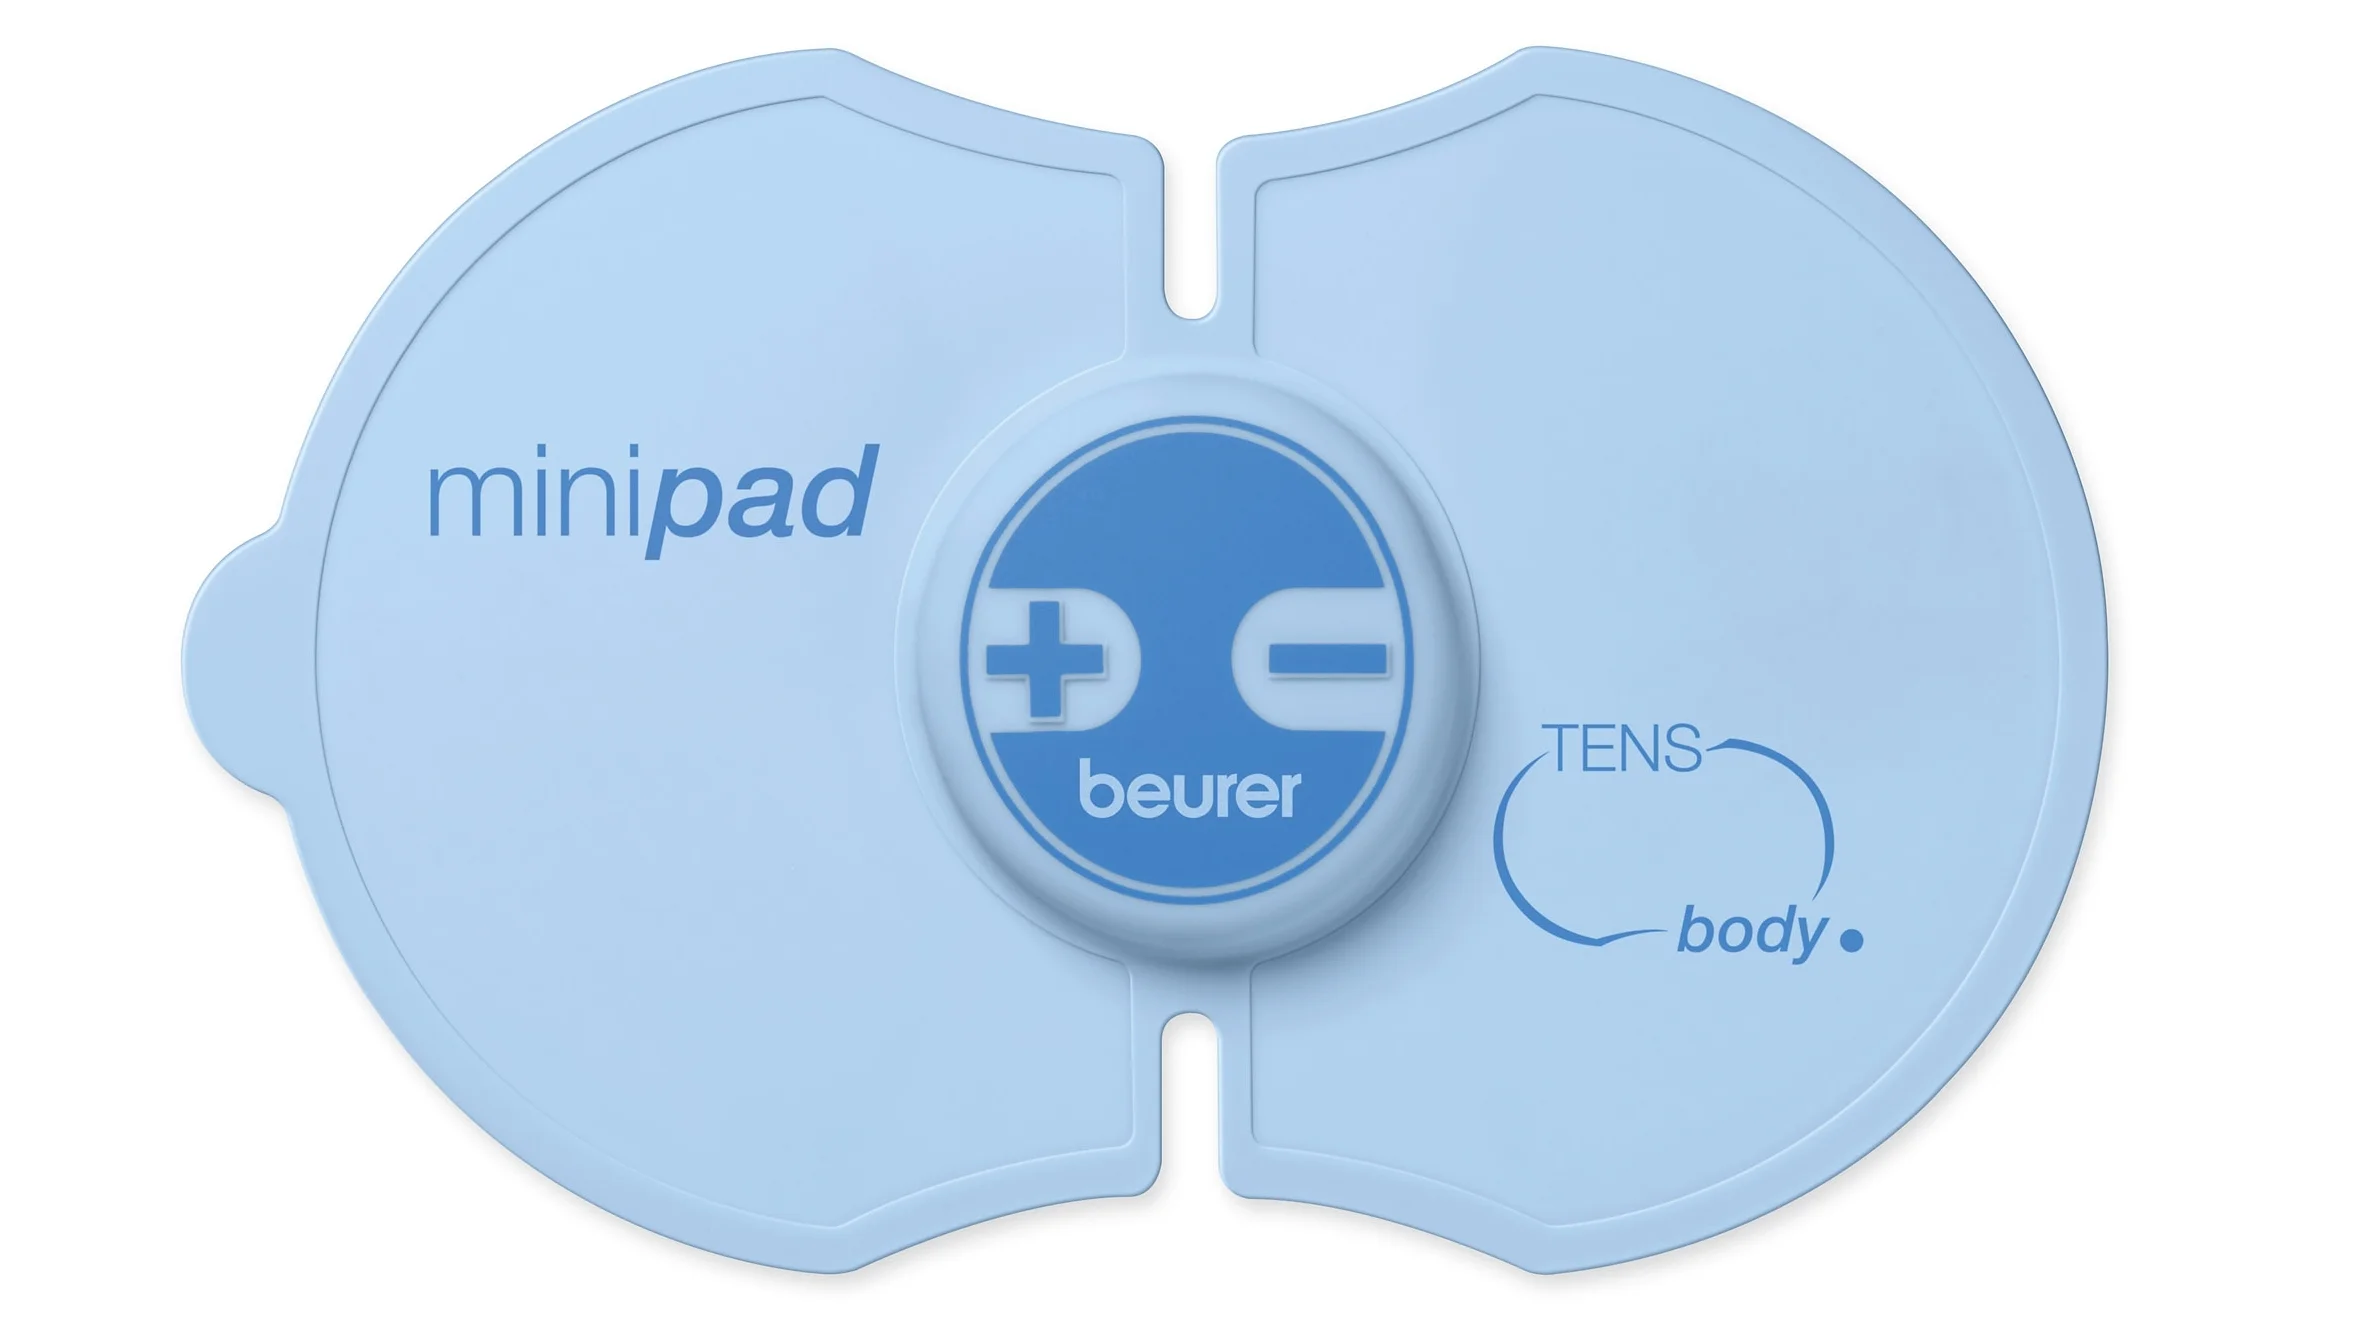 Beurer Tens-To-Go Pain Relief Mini Pad on Vimeo